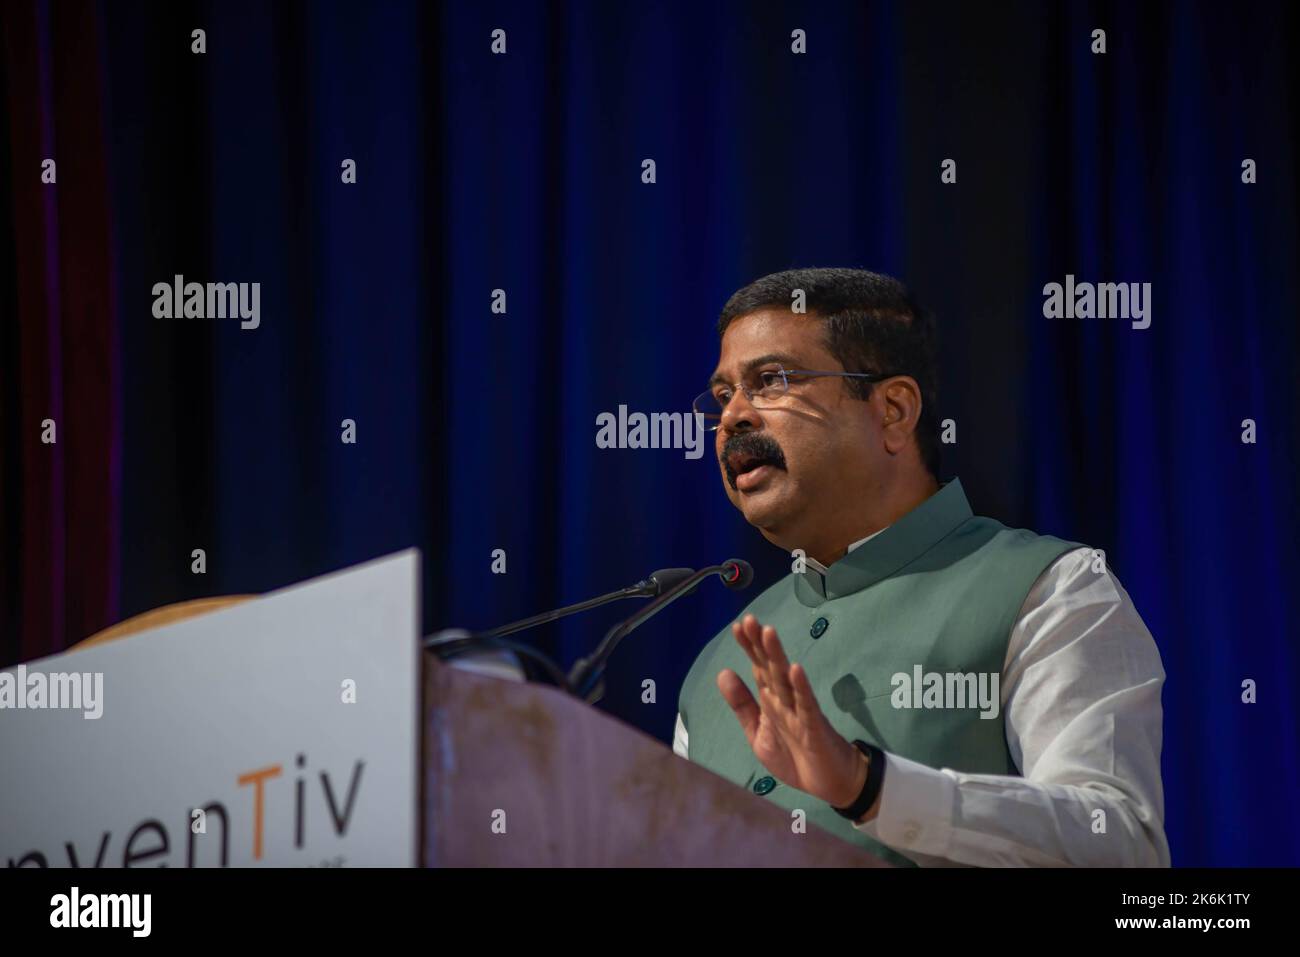 Delhi, India. 14th Oct, 2022. Dharmendra Pradhan Union Minister for Education and Skill Development and Entrepreneurship during inaugural day of IInvenTiv 2022, the first ever all IITs (indian institute of technology) research and development Showcase at the Indian Institute of Technology. IInvenTiv 2022 is an R&D (research and development) Fair organised under the supervision of a Steering Committee headed by Dr. Pawan Goenka, Chairman, BoG (Board of Governors) IIT and the event marks the coming together of all the 23 IITs under one umbrella to showcase their respective research and innovatio Stock Photo